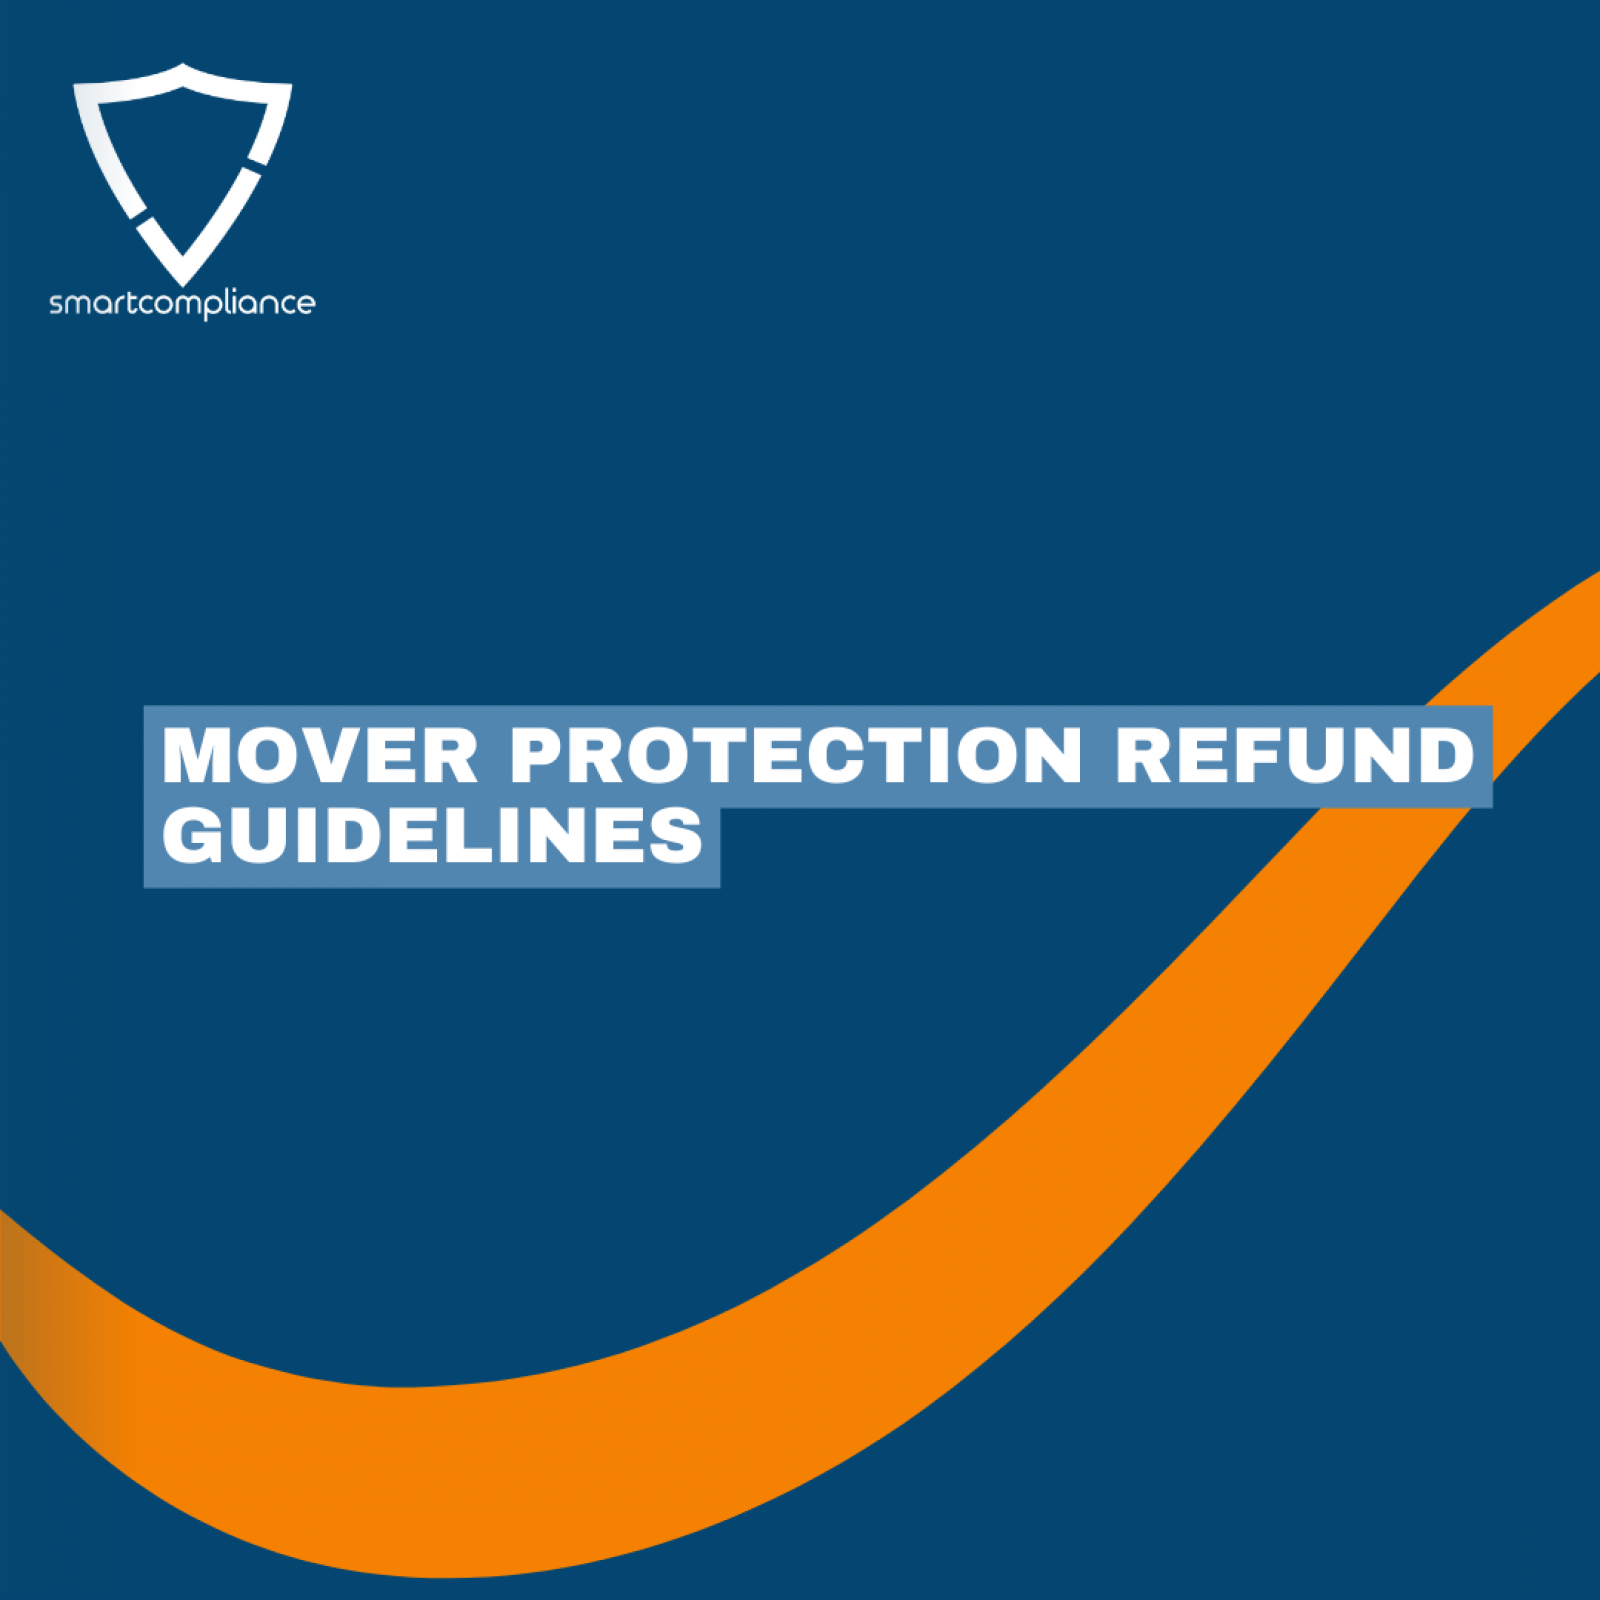 Mover Protection Refund Guidelines